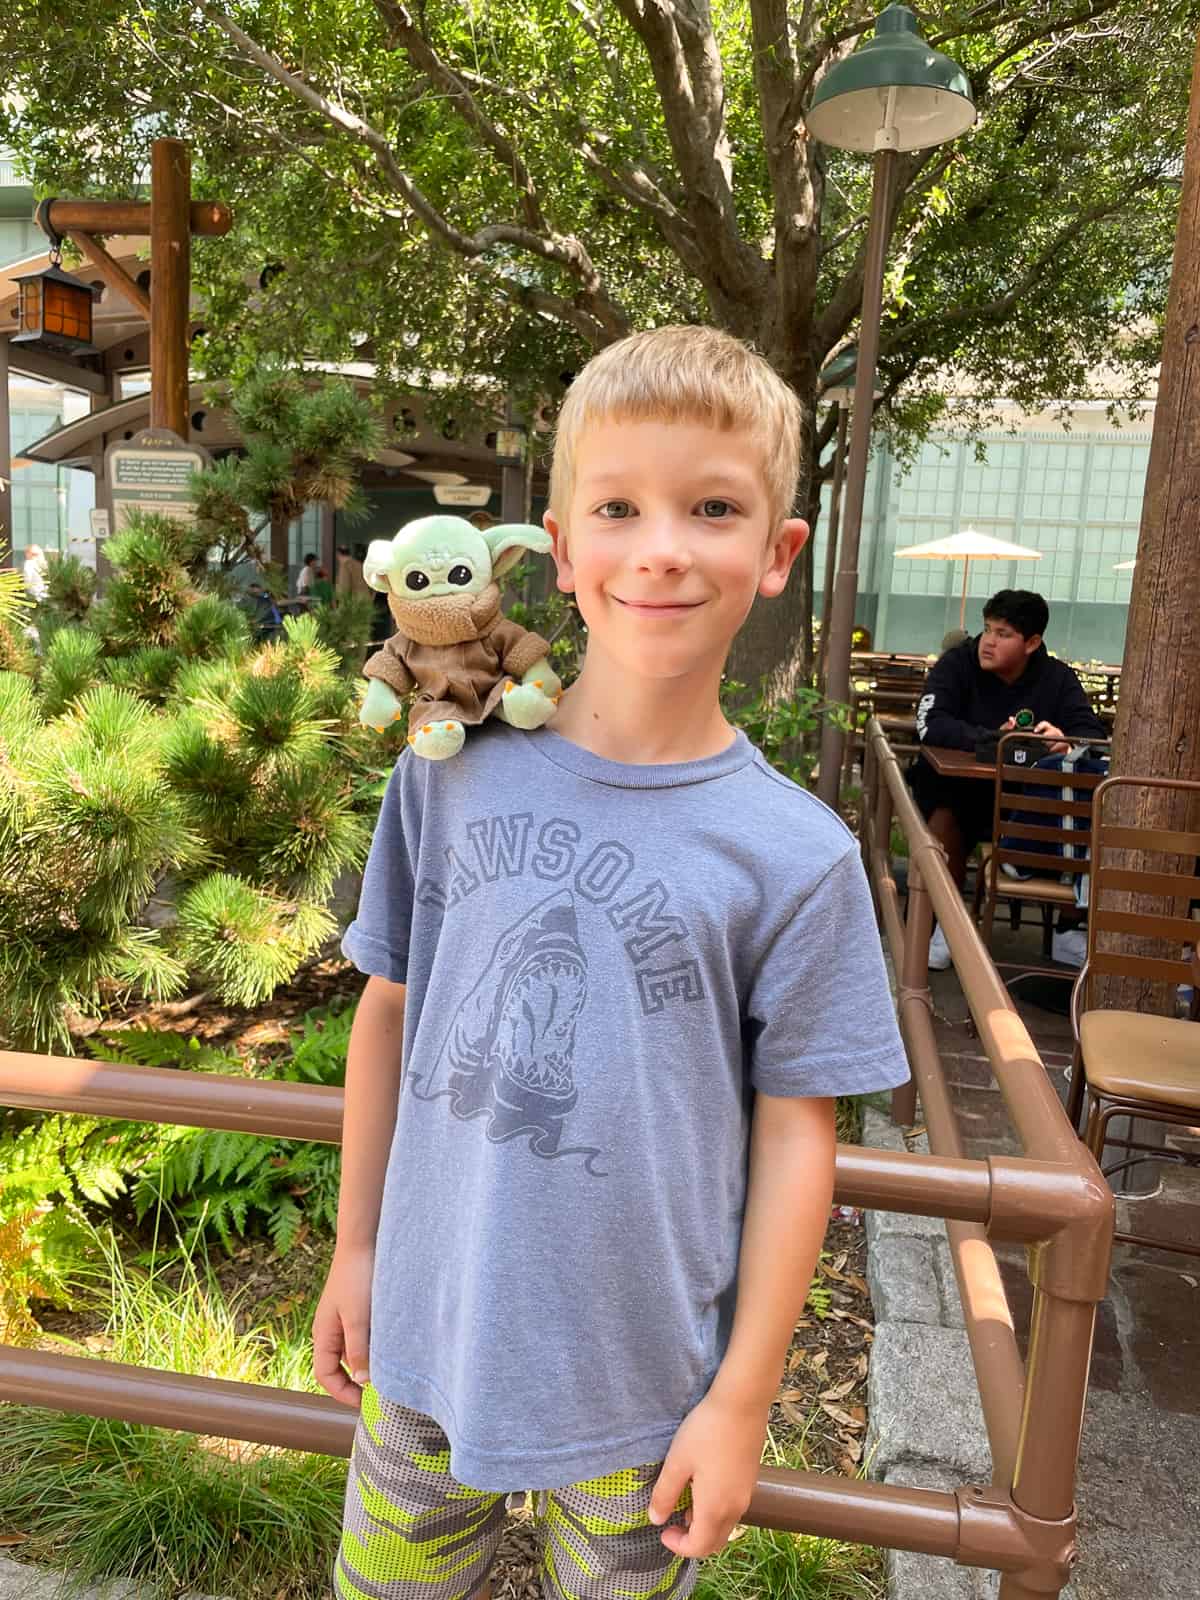 a little boy with a baby yoda shoulder buddy on his shirt.